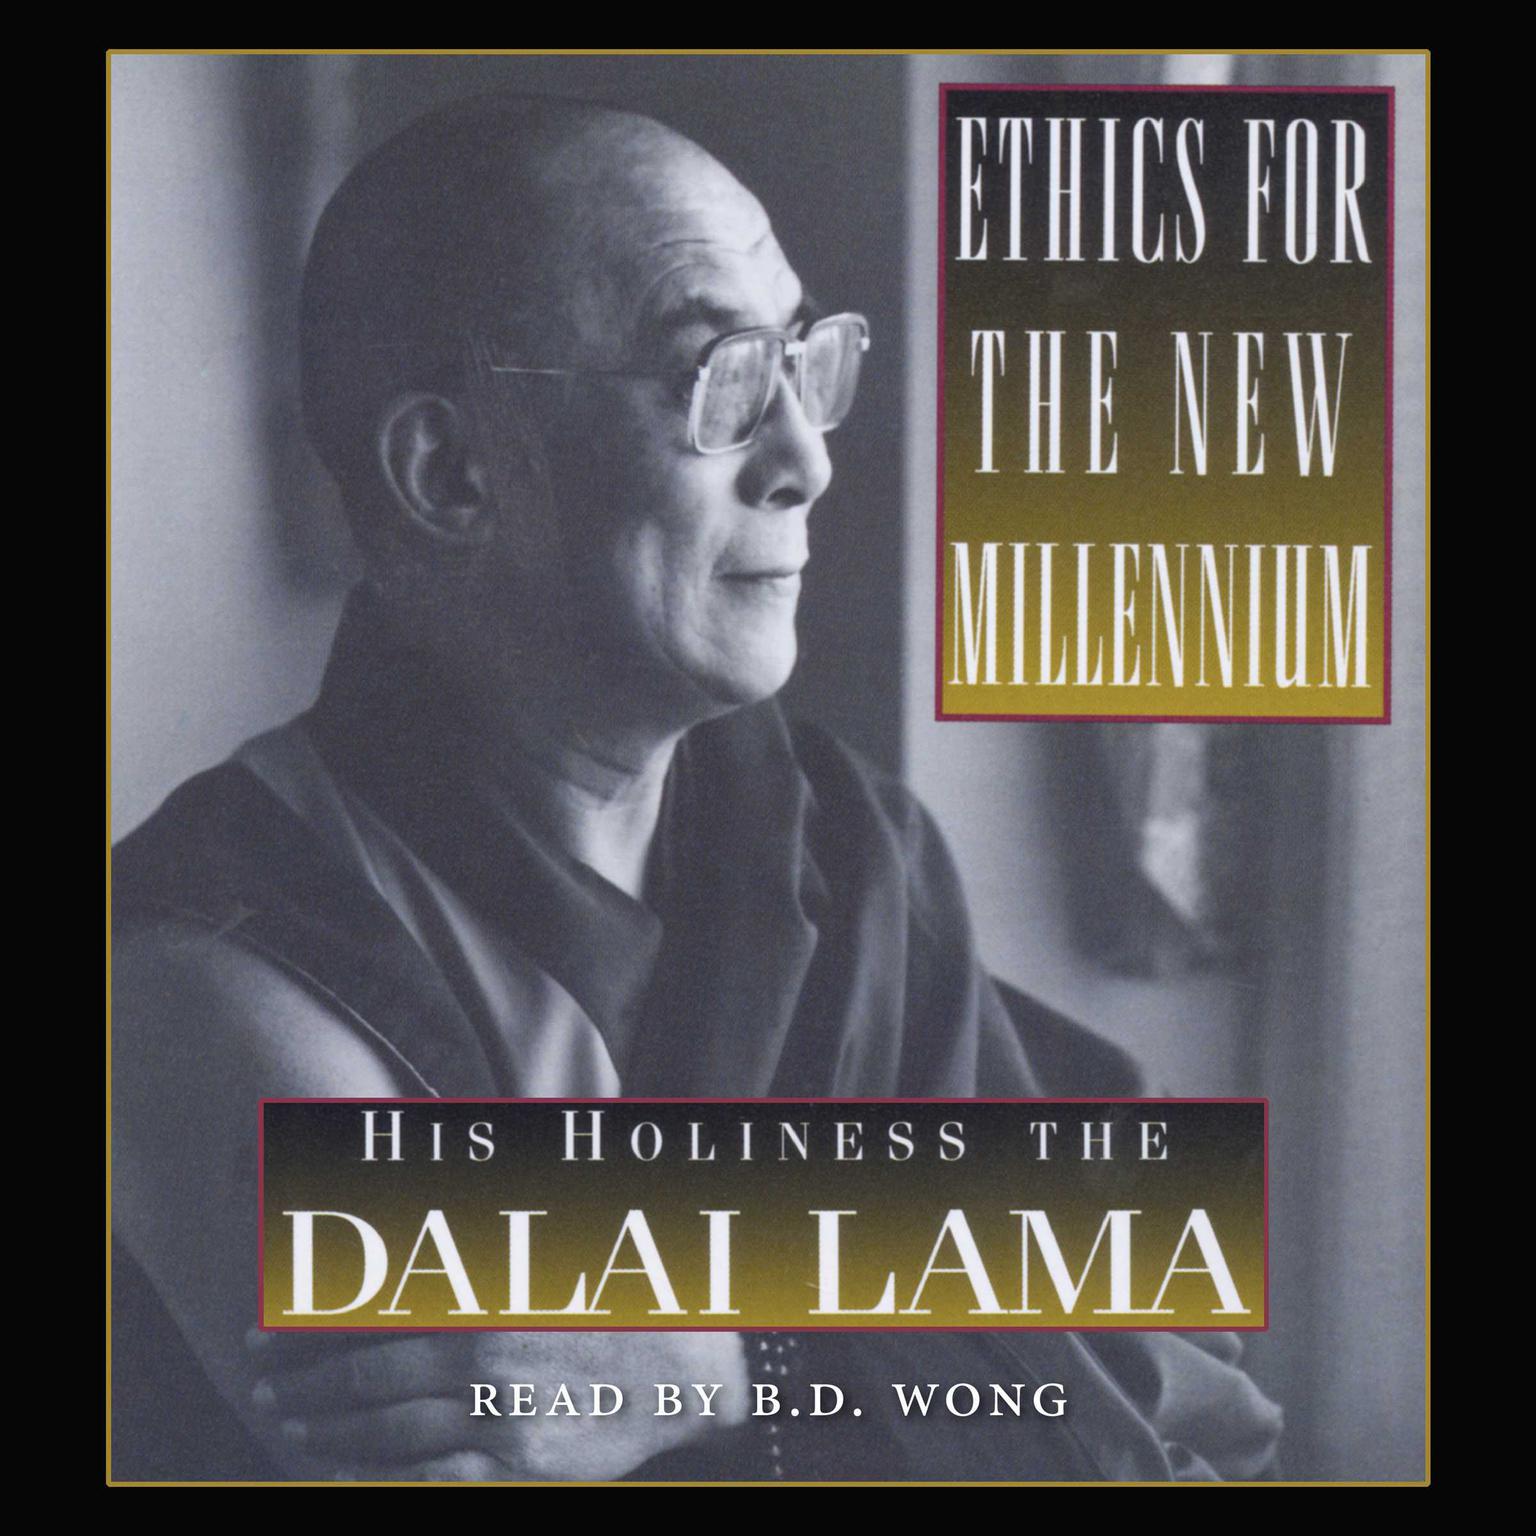 Ethics For The New Millennium (Abridged) Audiobook, by His Holiness the Dalai Lama